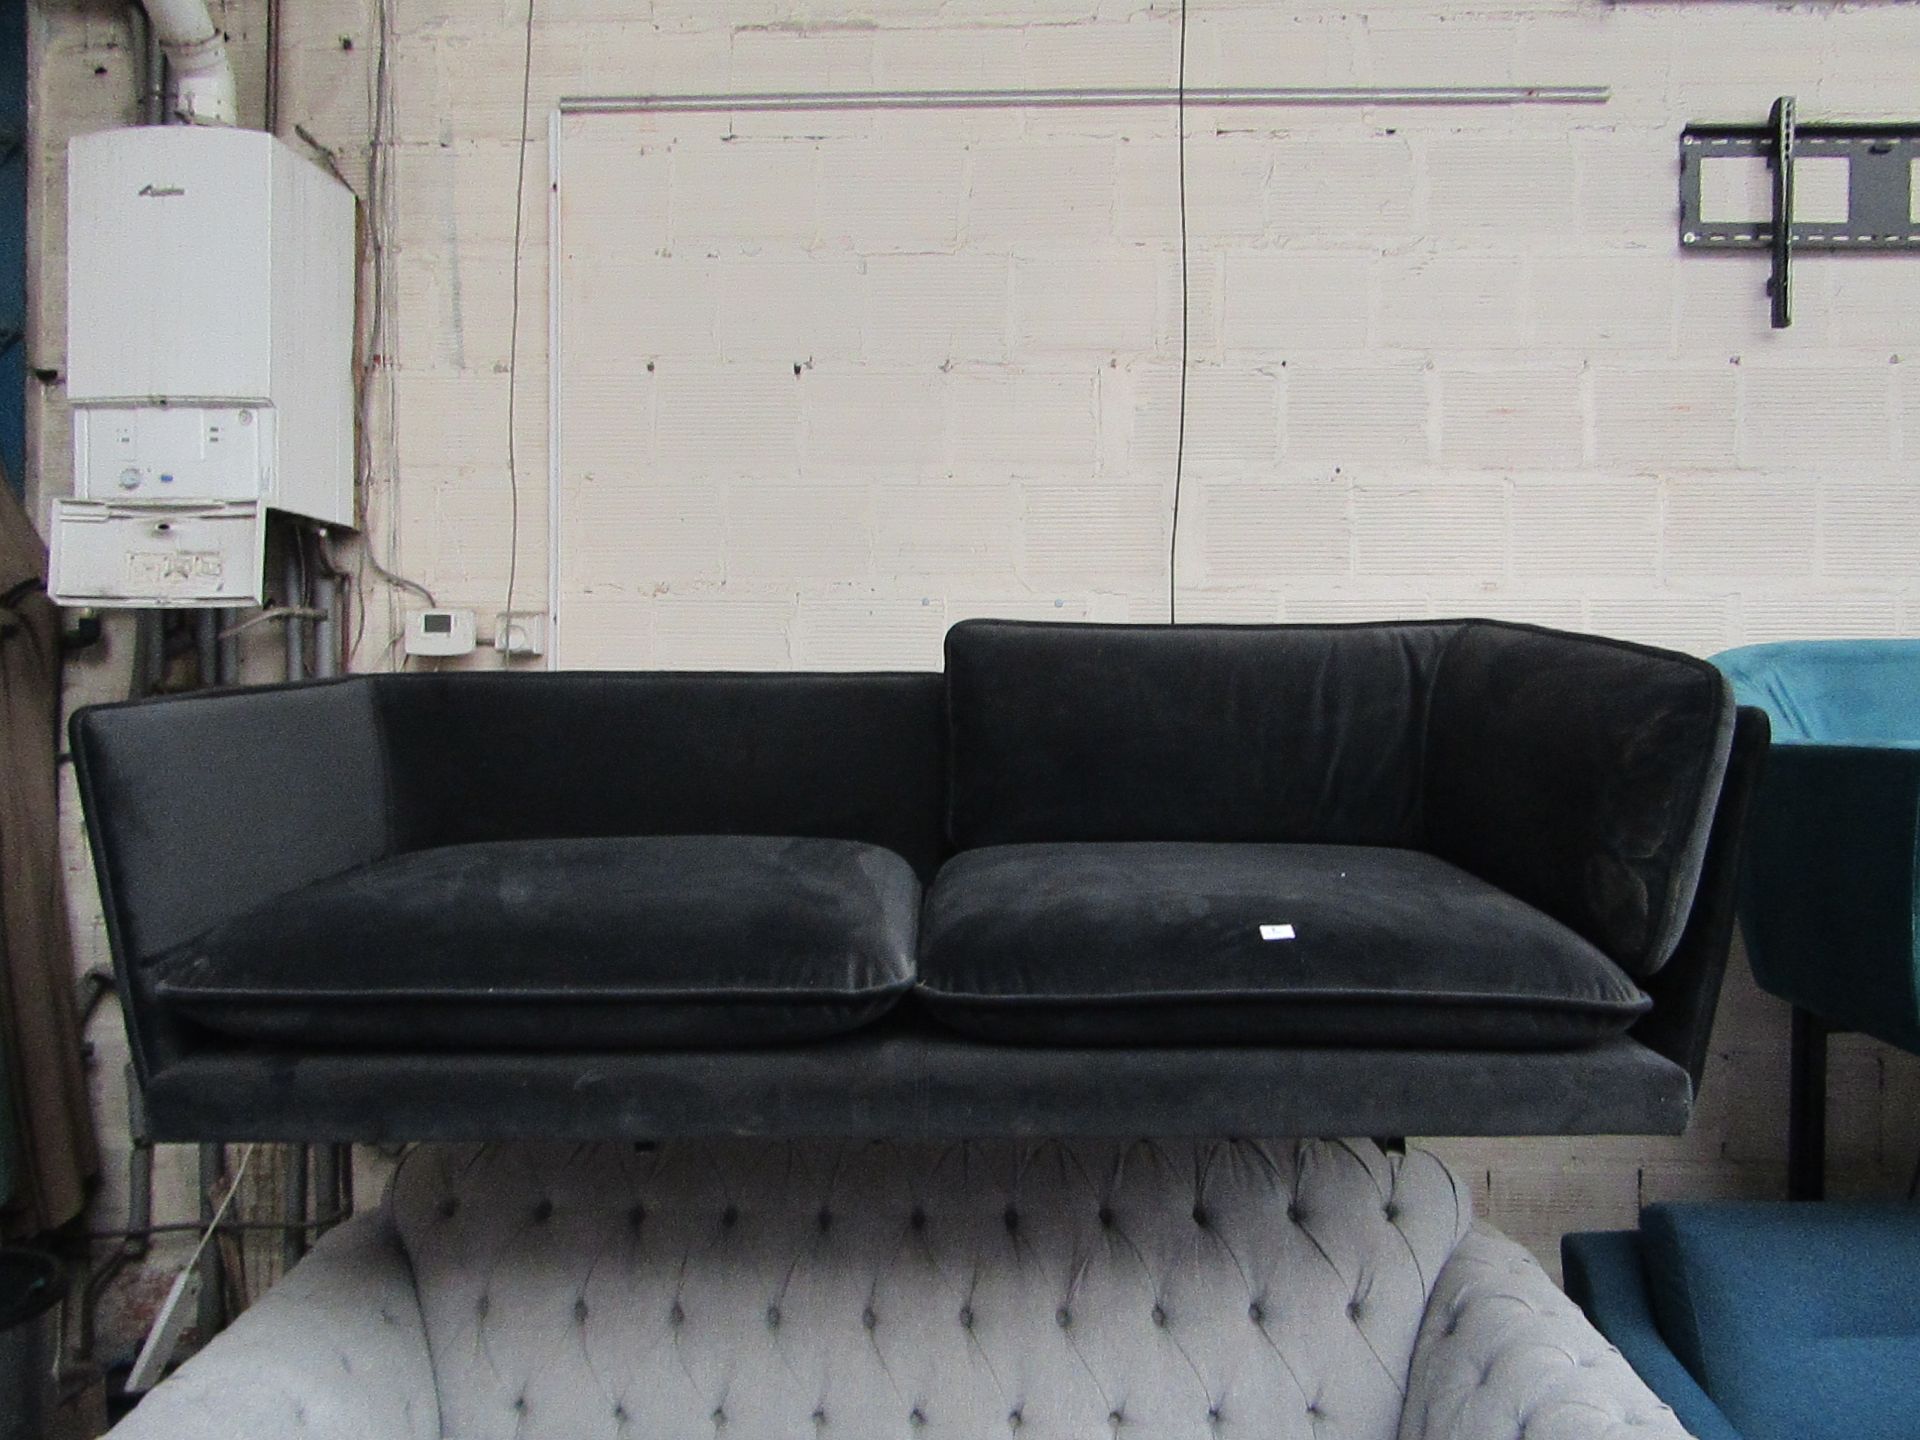 | 1X | MADE.COM WES 2 SEATER SOFA, MOURNE GREY VELVET | MISSING BACK CUSHION & MAY HAVE SMALL